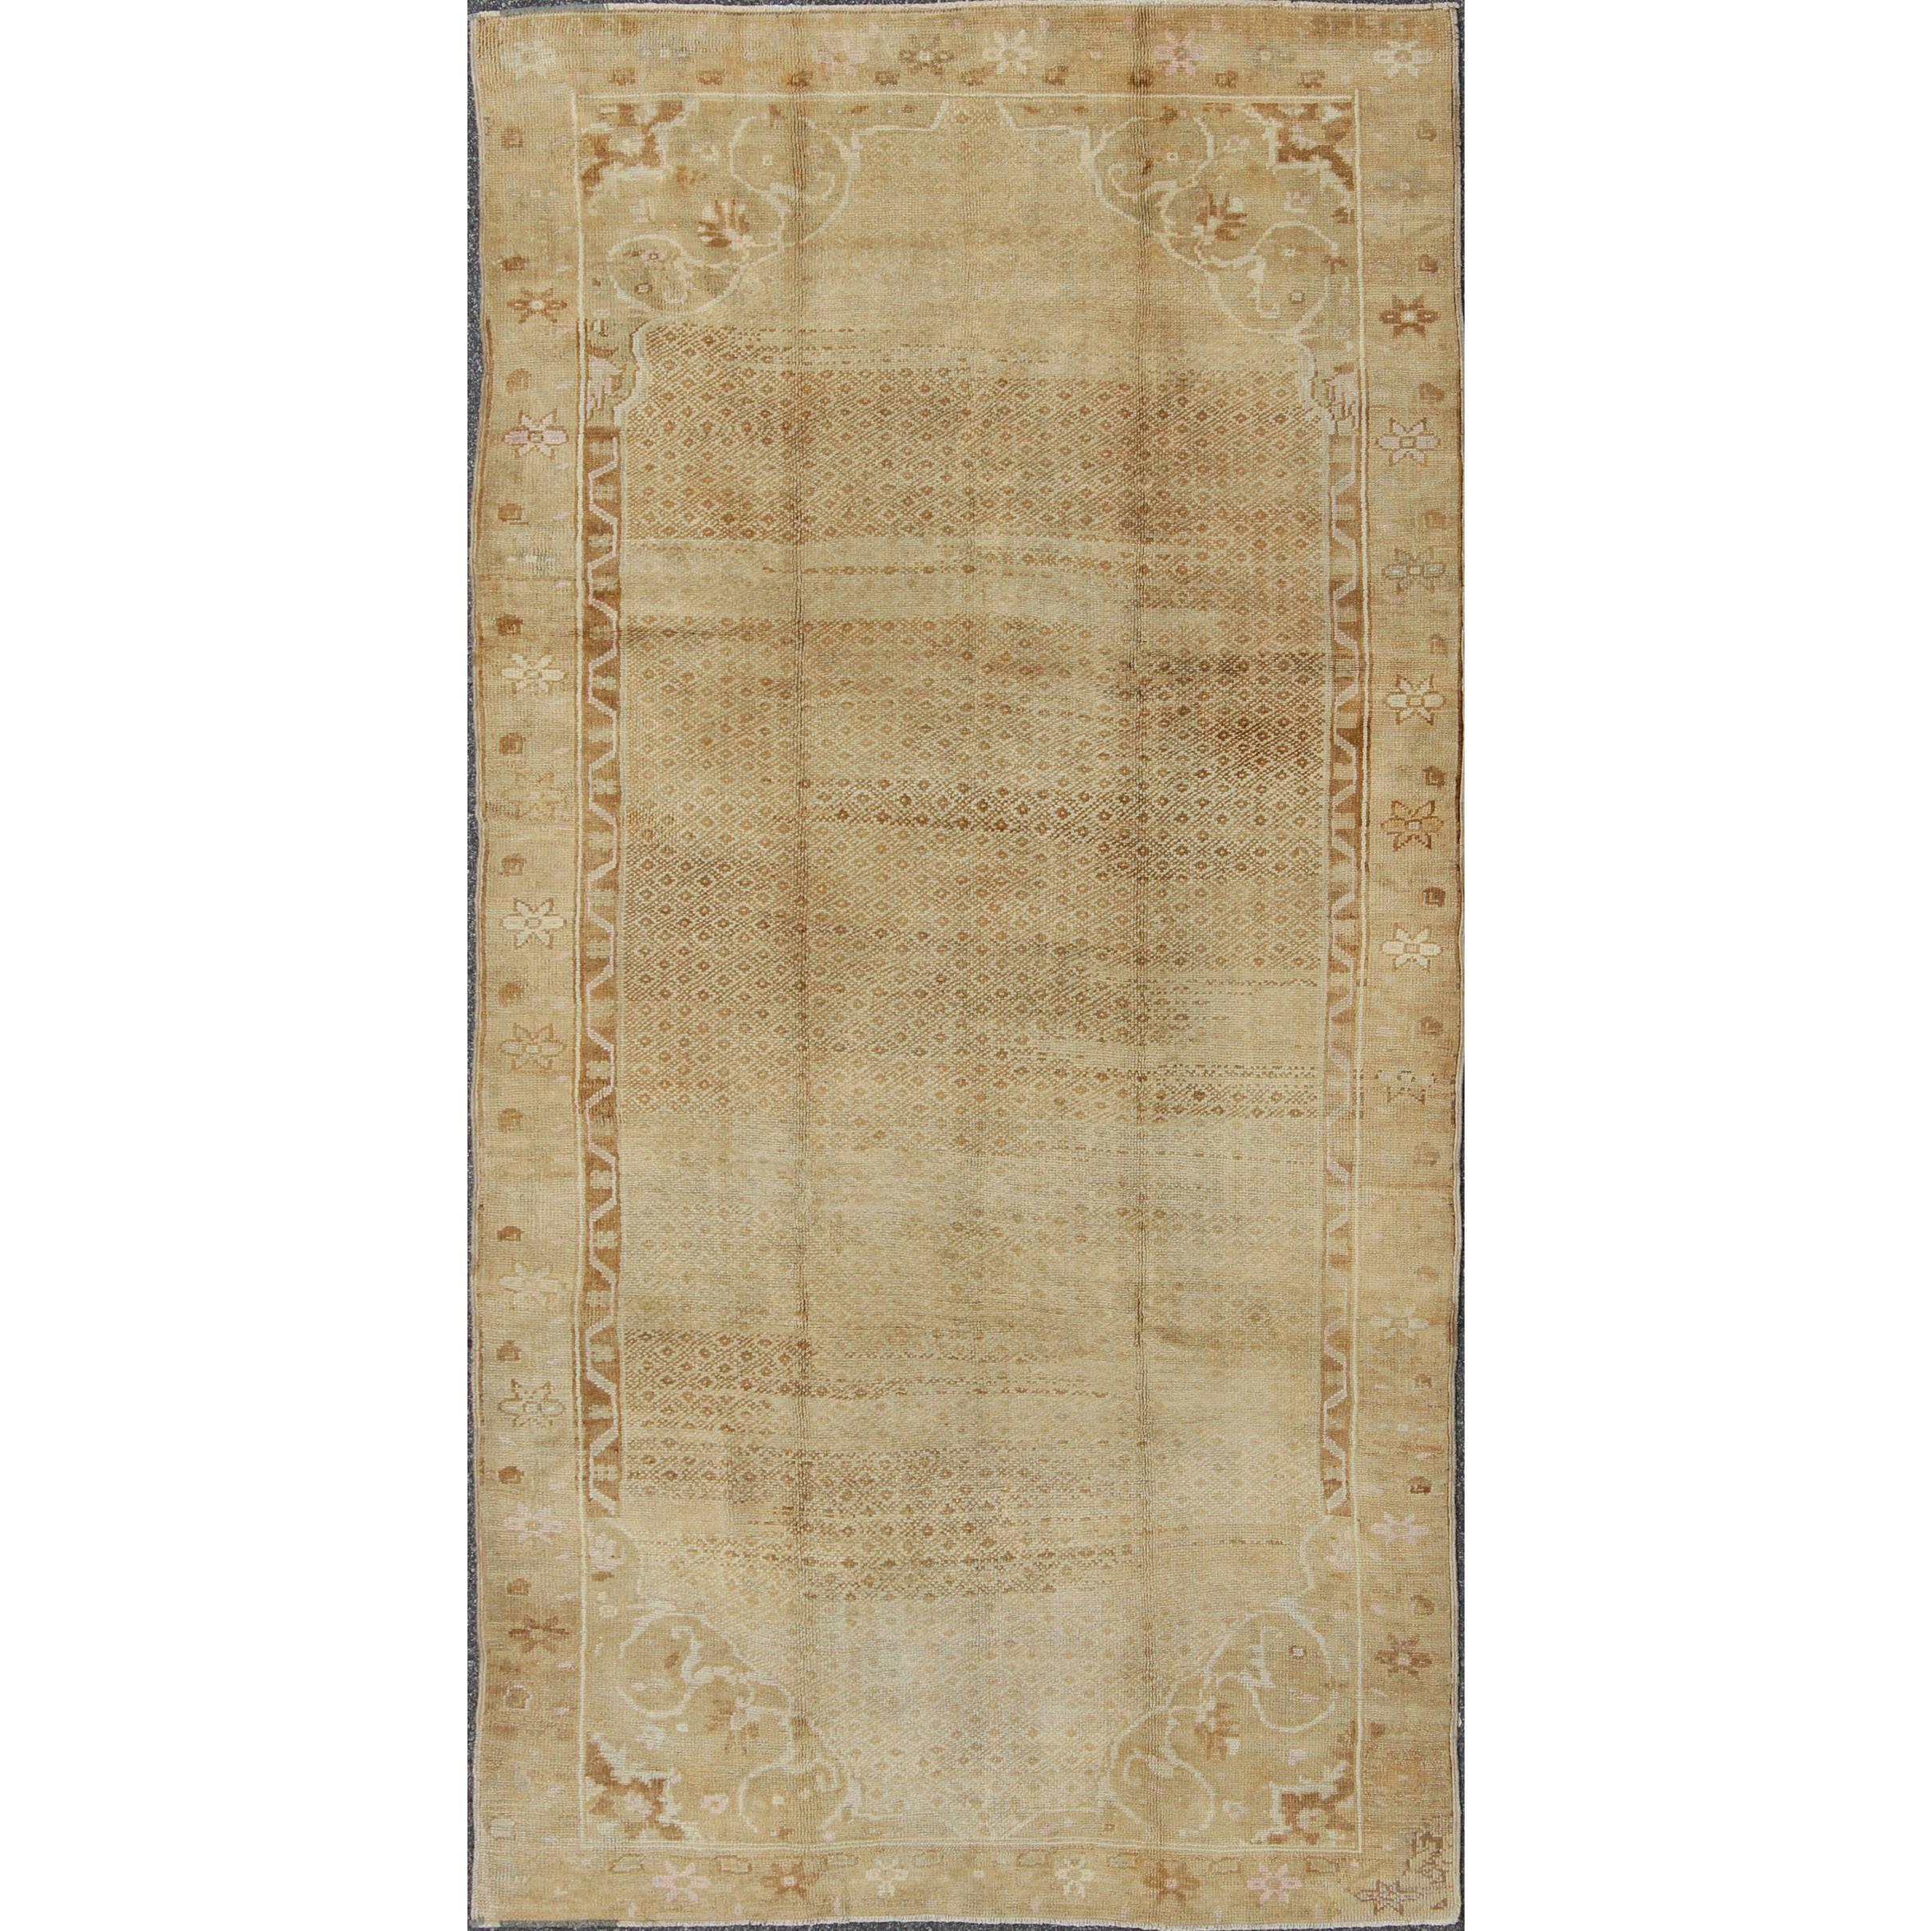 Tan Vintage Turkish Oushak Rug with All-Over Diamond Design and Floral Border